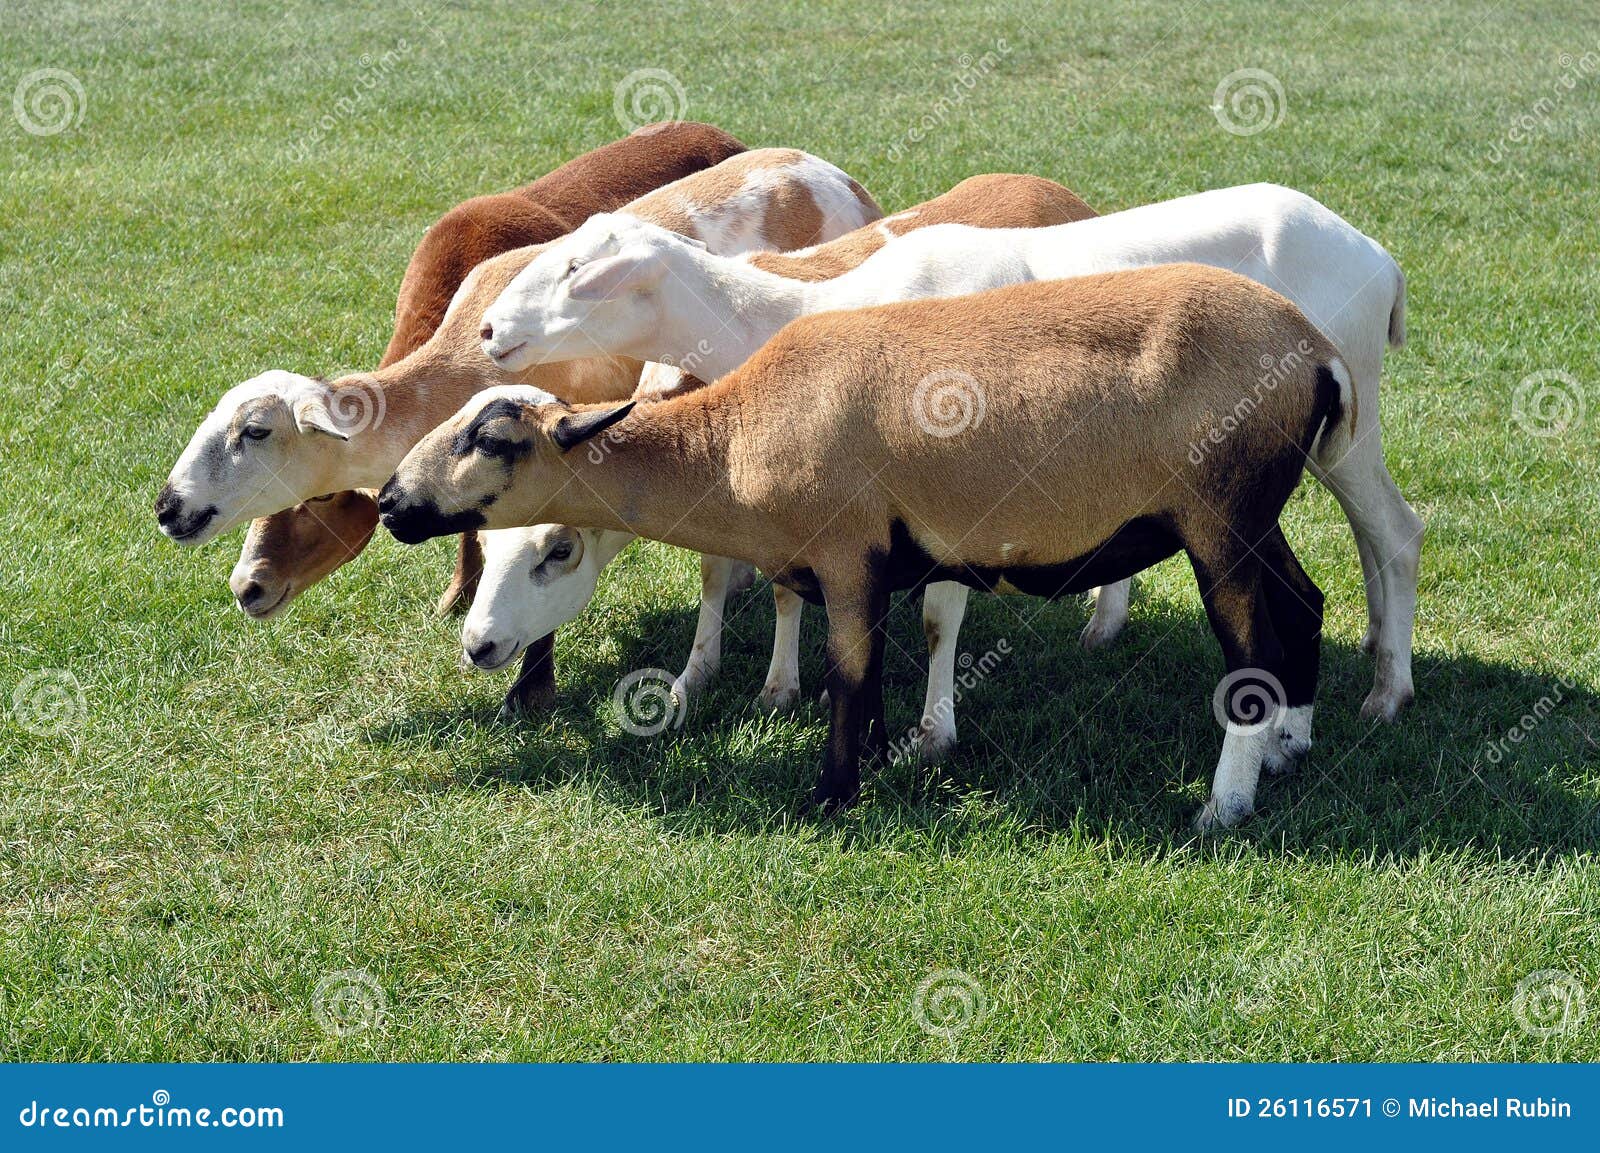 Sheep Huddled Together on a Field